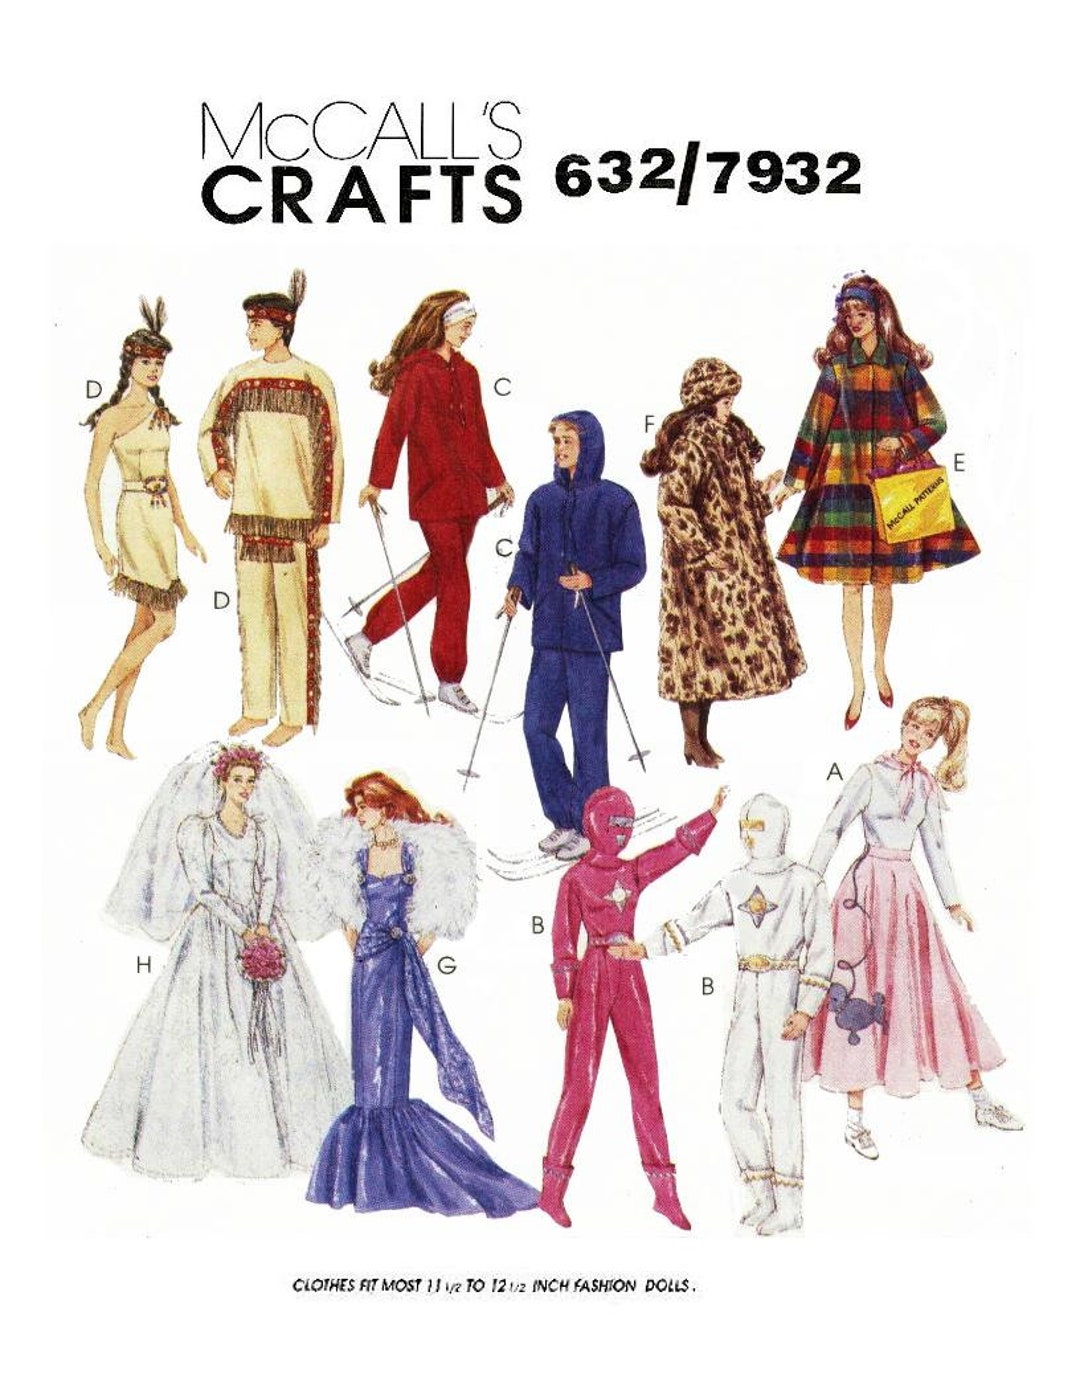 Barbie & Ken Doll Clothes, Mccall's 2580, 11-1/2 to 12 Fashion Dolls 